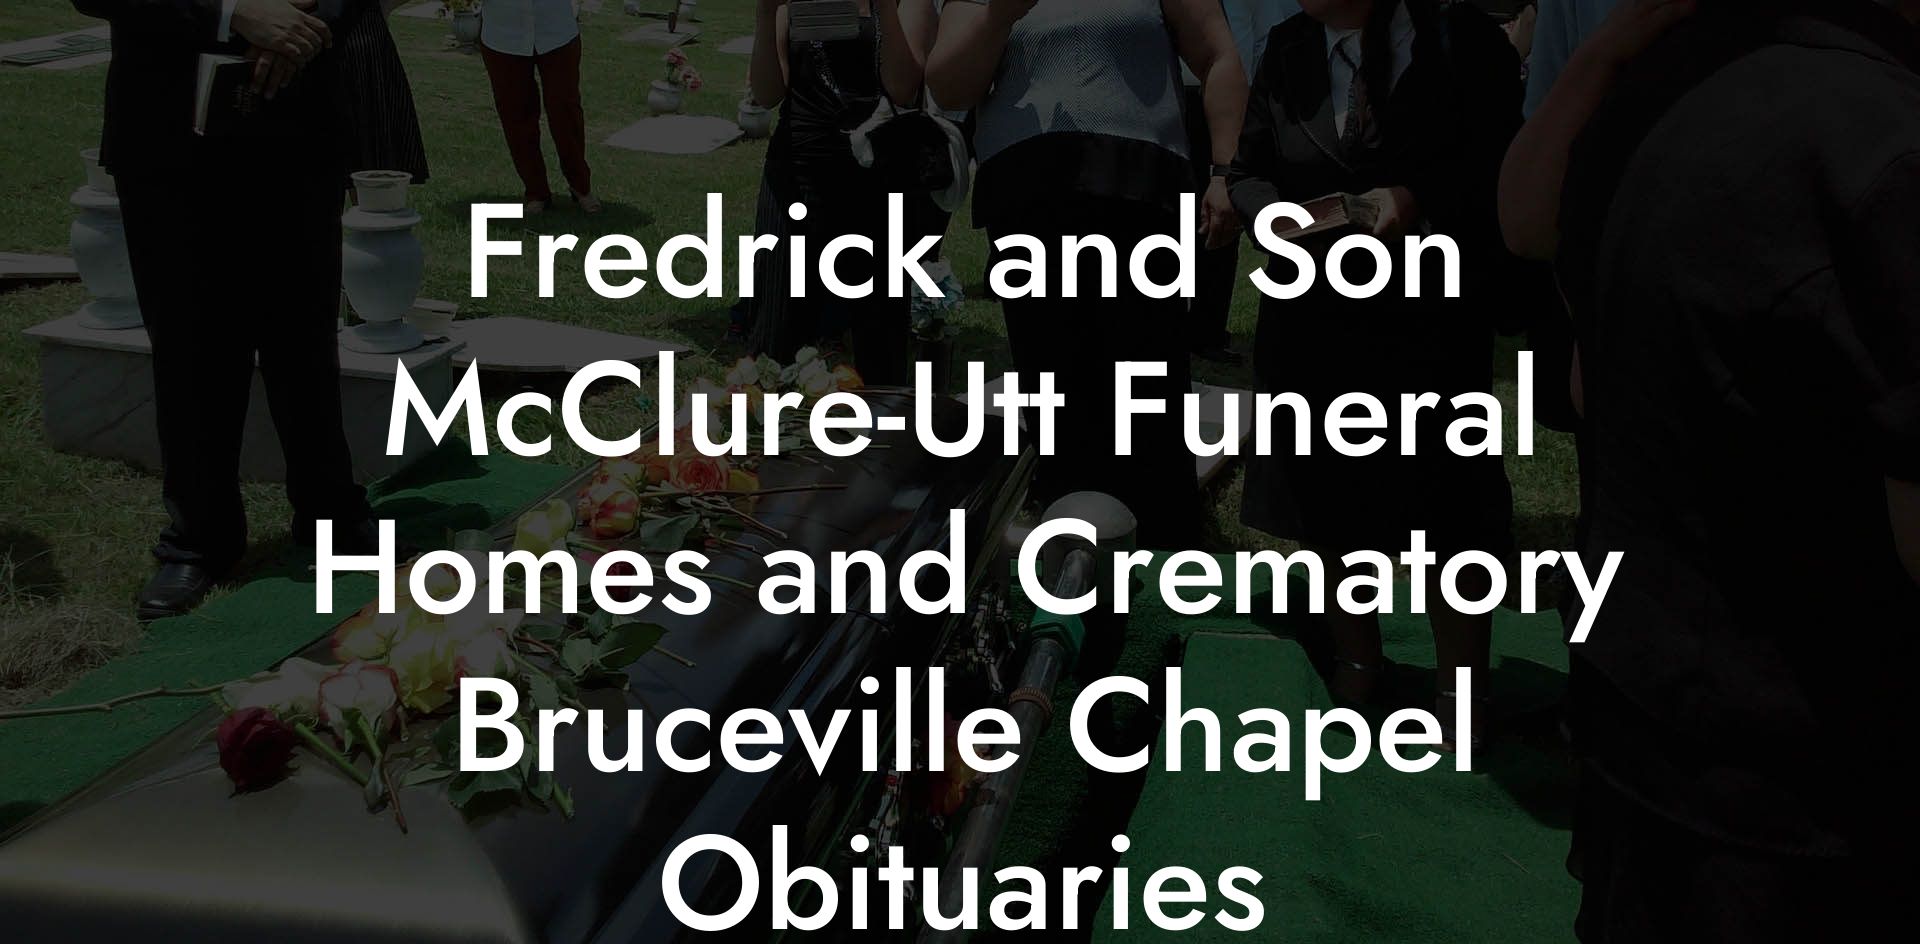 Fredrick and Son McClure-Utt Funeral Homes and Crematory Bruceville Chapel Obituaries